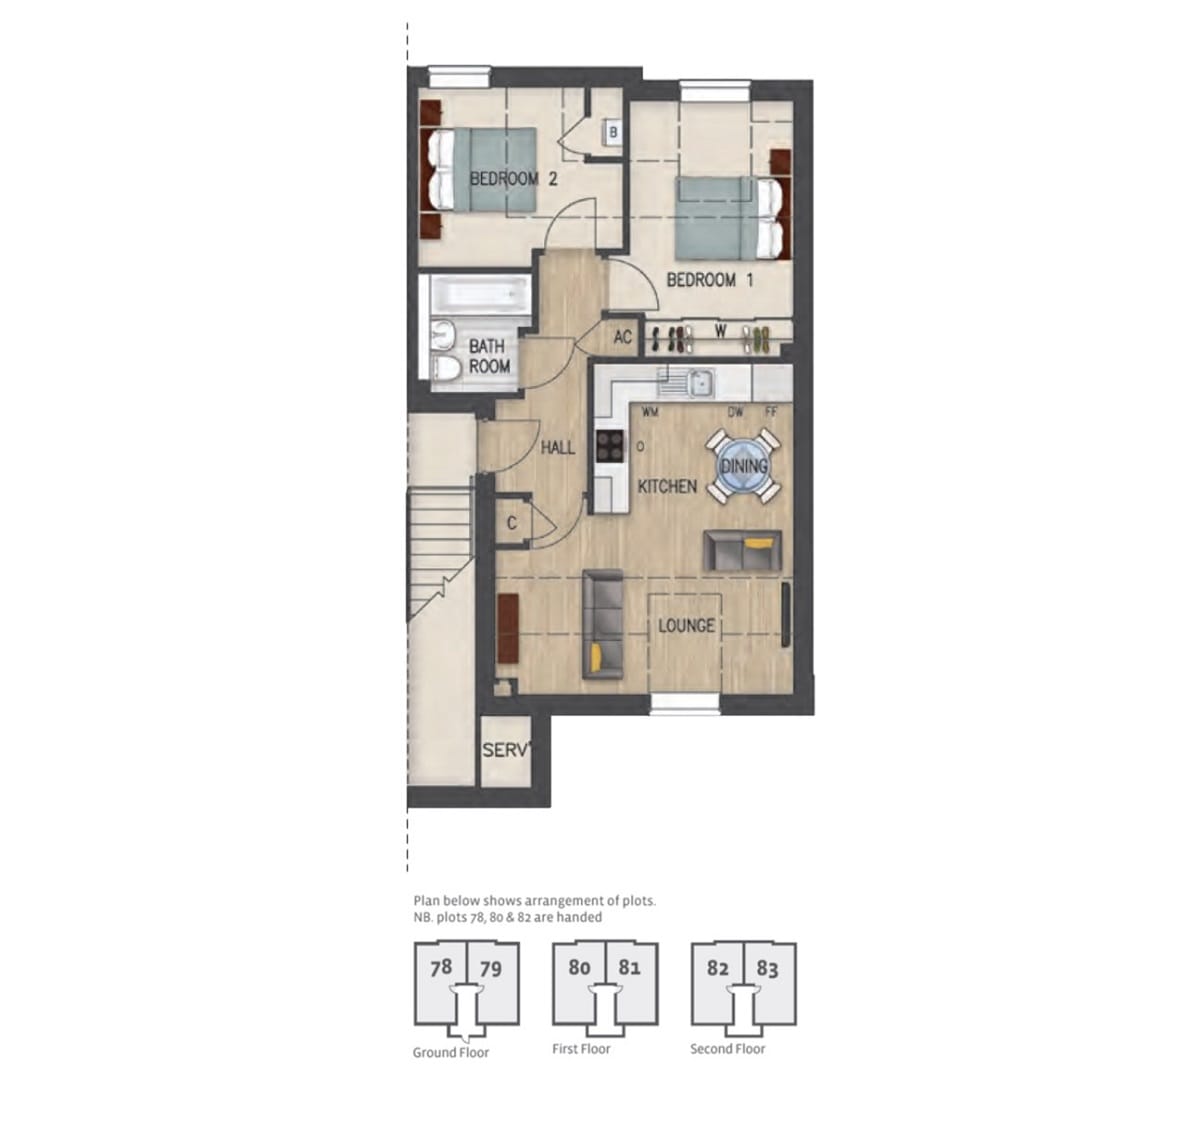 Heron Apartment Second Floor Plots 82 and 83